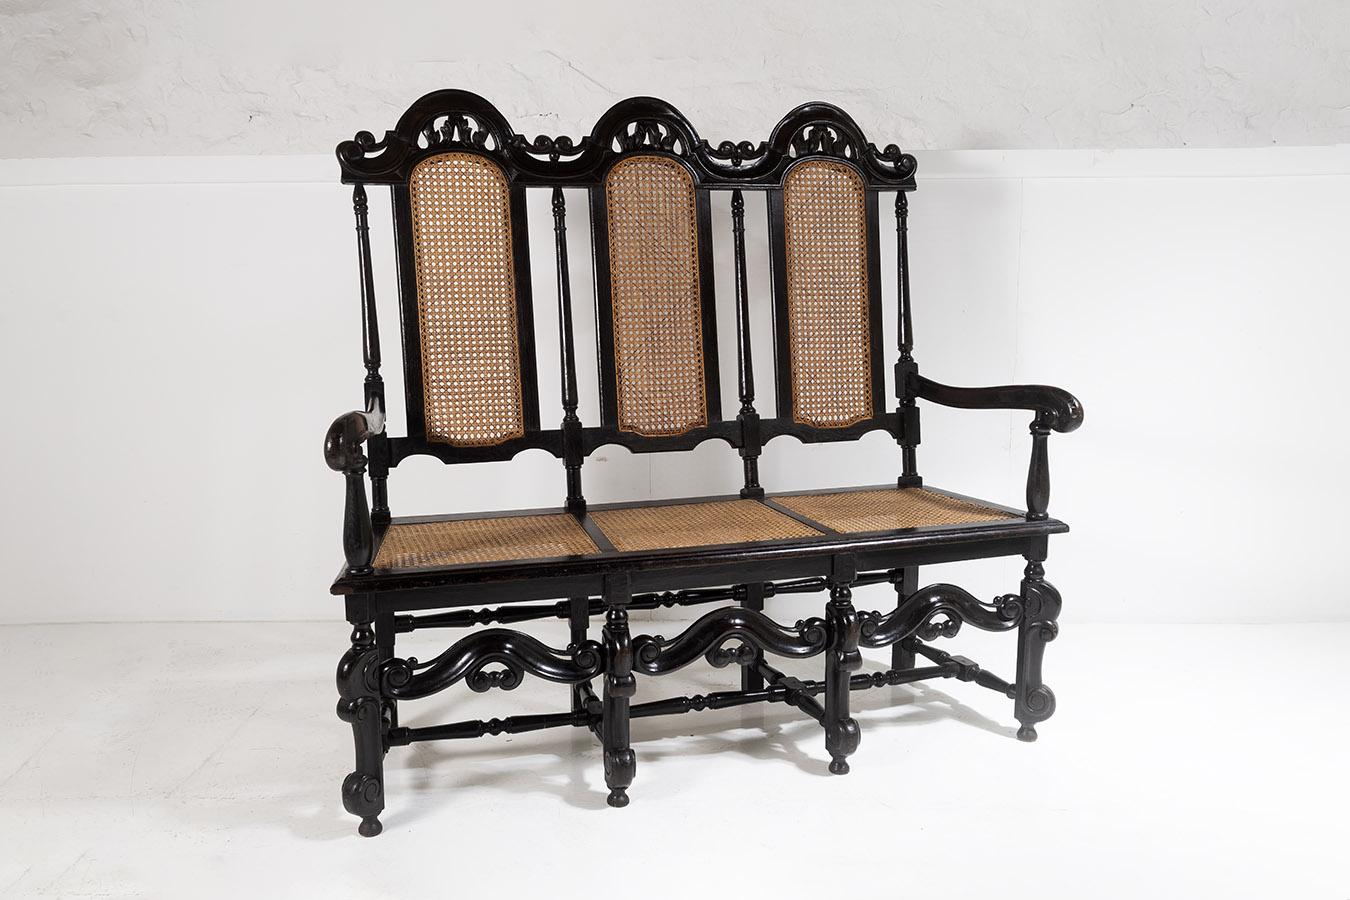 A decorative and well presented 19th Century Jacobean renaissance carved oak three seater high back bench settee.  A superb quality piece with ornate arched back and cane inset panels. A lovely contrast with dark, almost ebonised wood frame, and